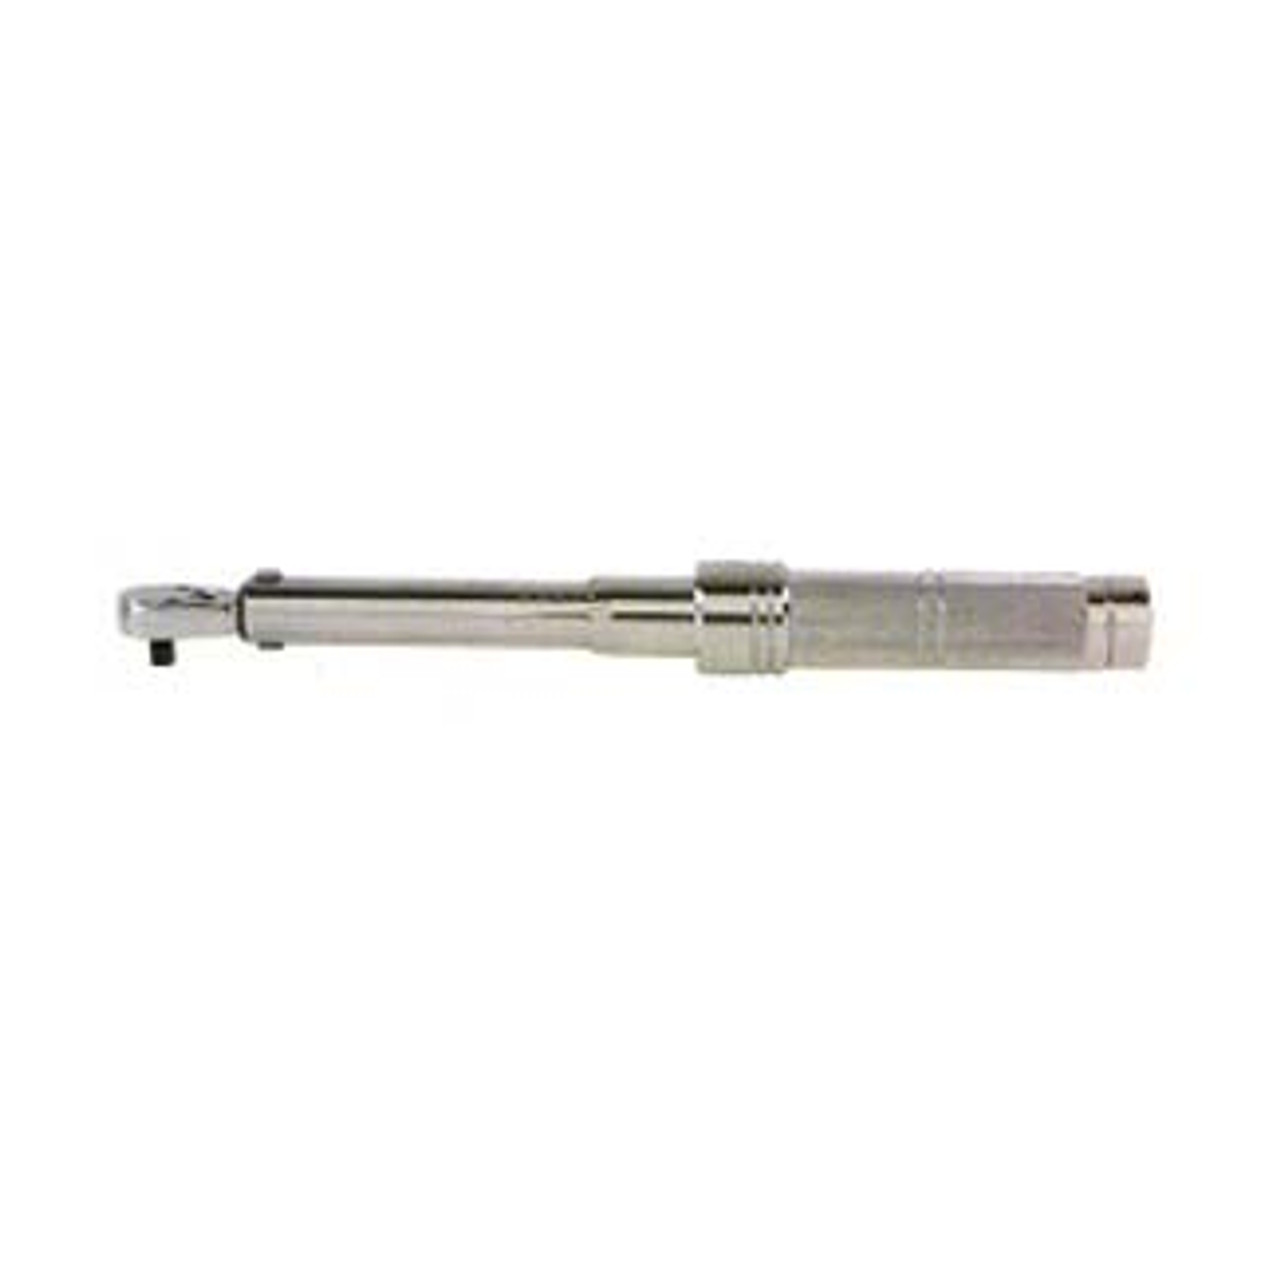 BIG DAWG and #153, Inch Pound Torque Wrench - Fixed Head 6061F